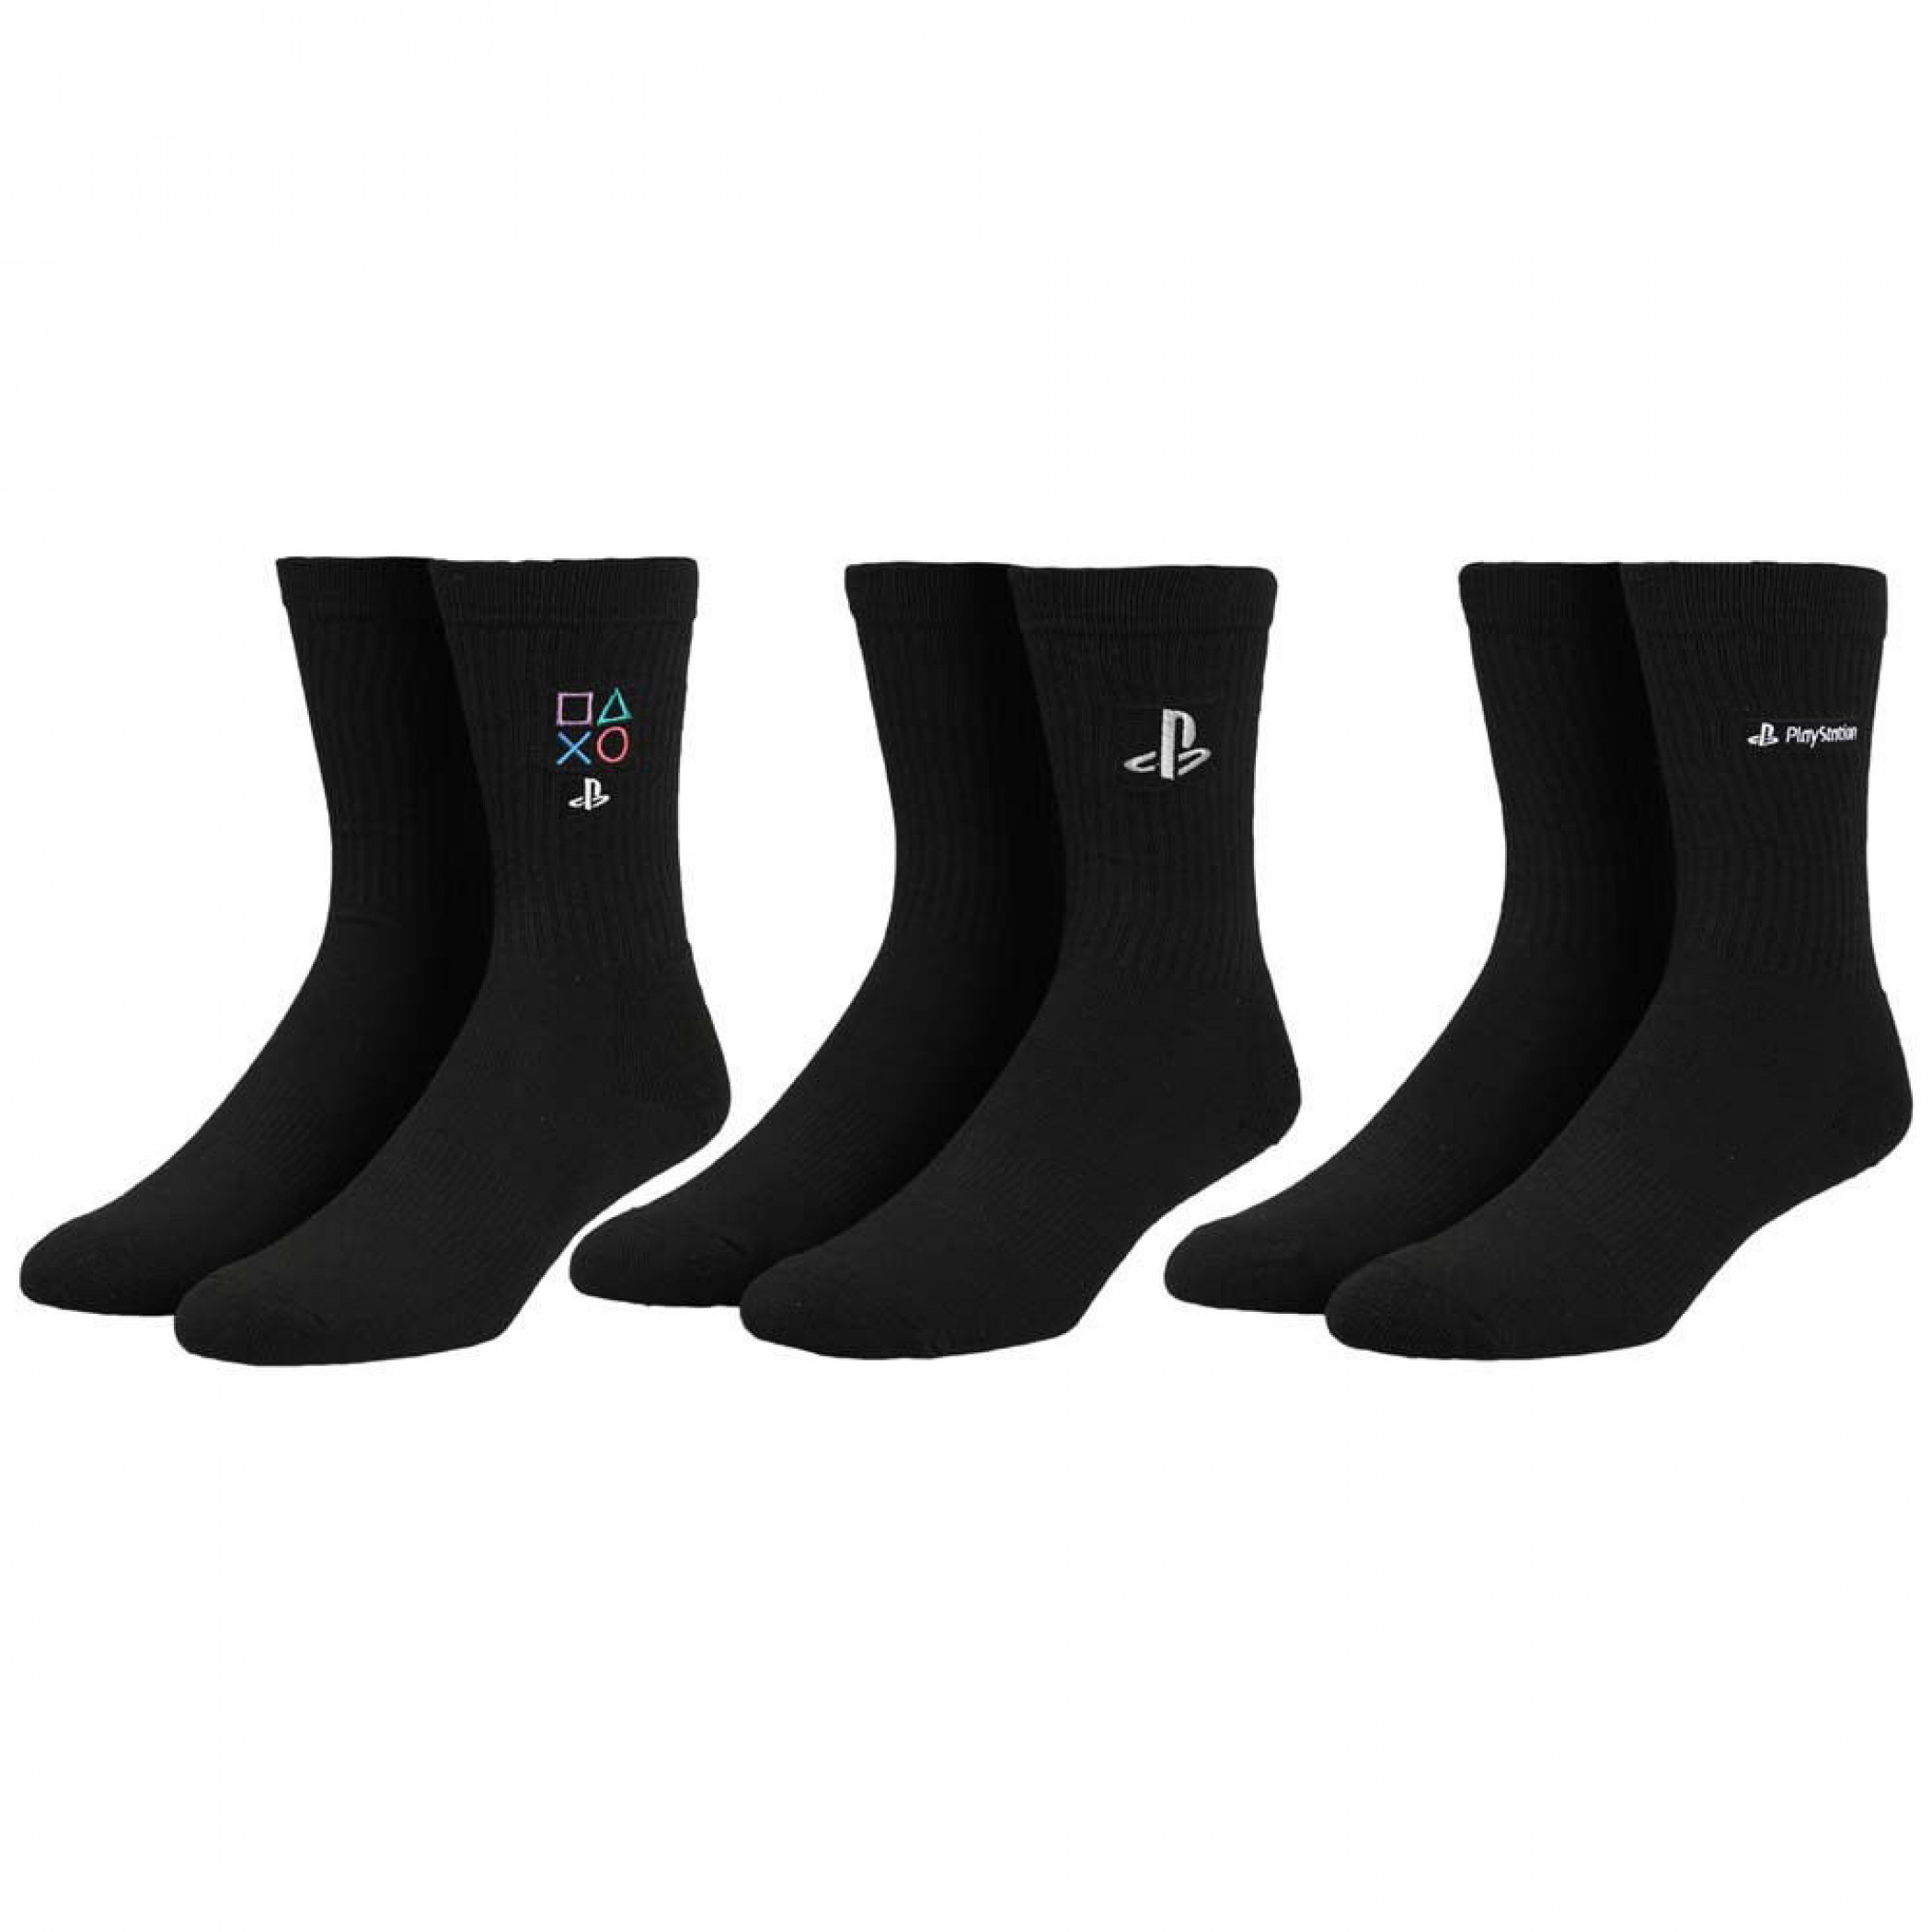 Sony PlayStation Embroidered Crew Socks 3-Pack